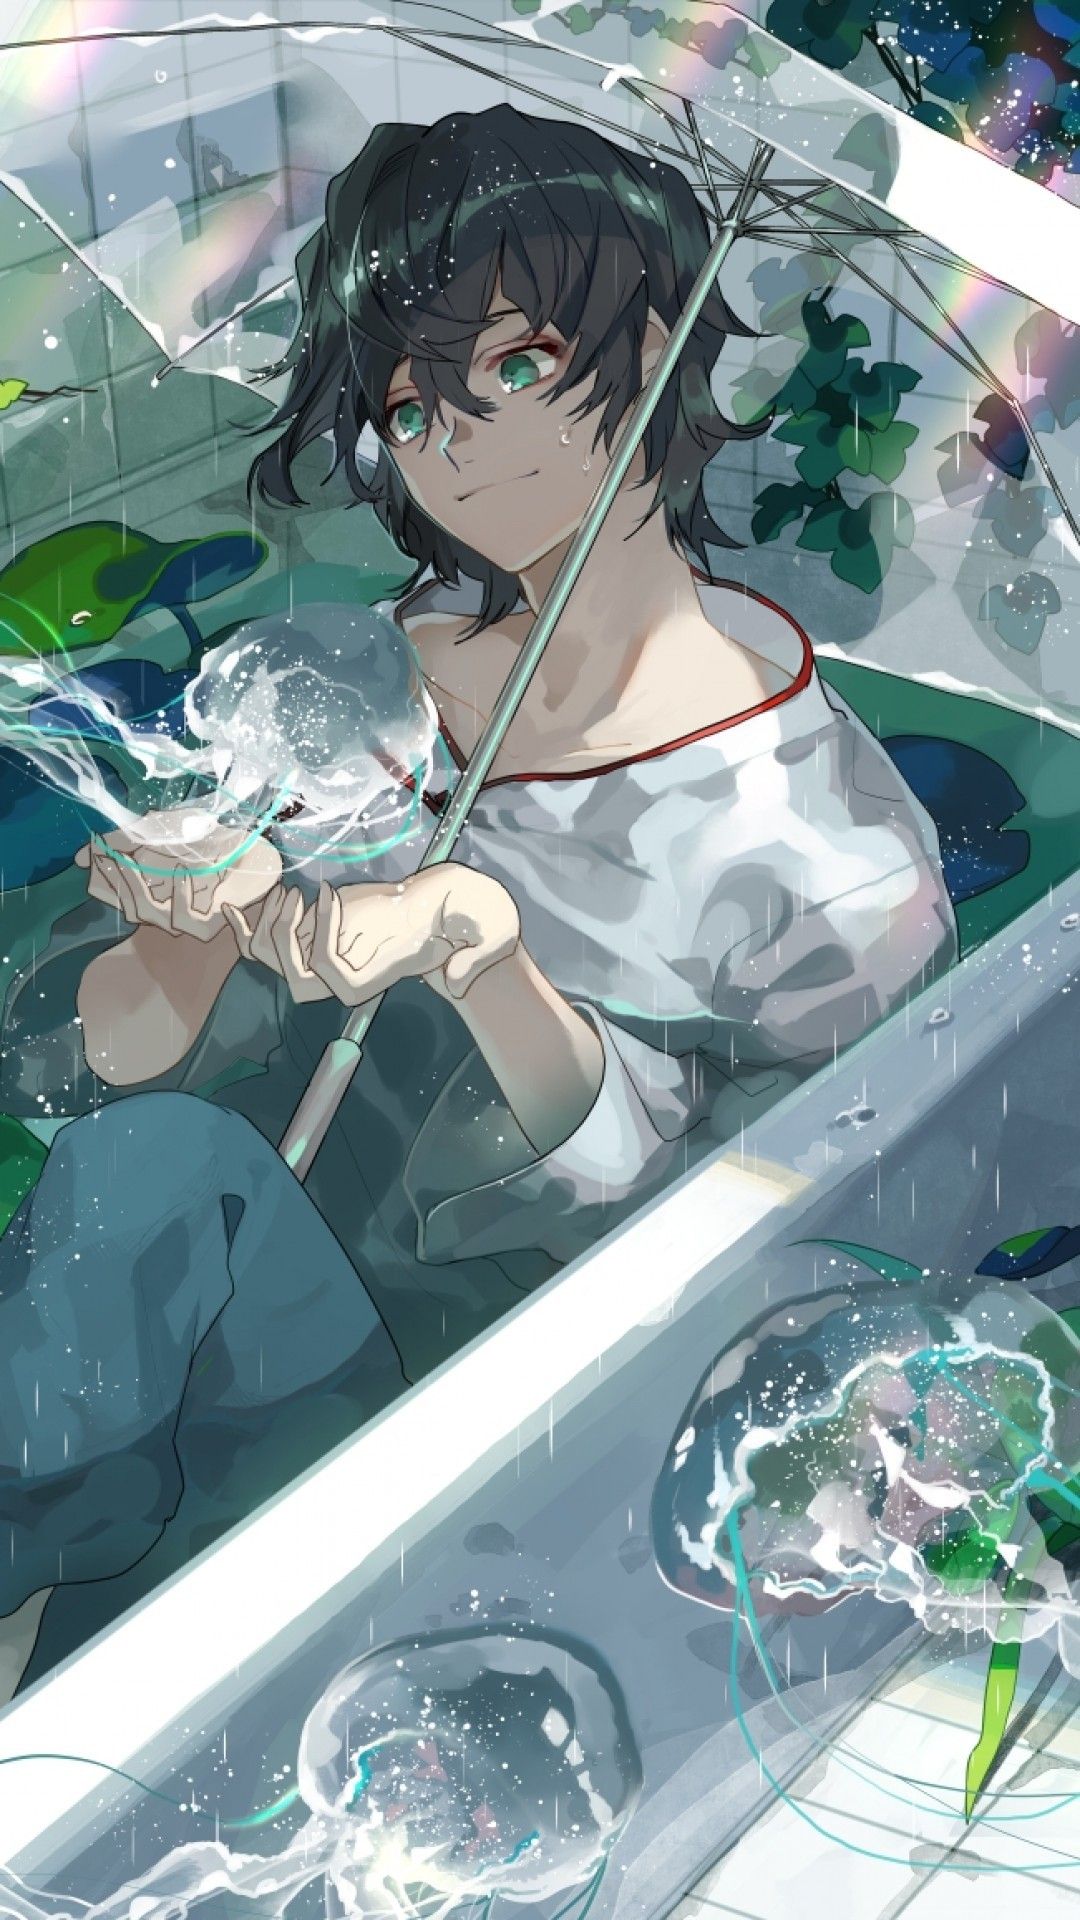 Download 1080x1920 Anime Boy, Bathtub, Green Leaves, Jellyfish, Transparent Umbrella Wallpaper for iPhone iPhone 7 Plus, iPhone 6+, Sony Xperia Z, HTC One